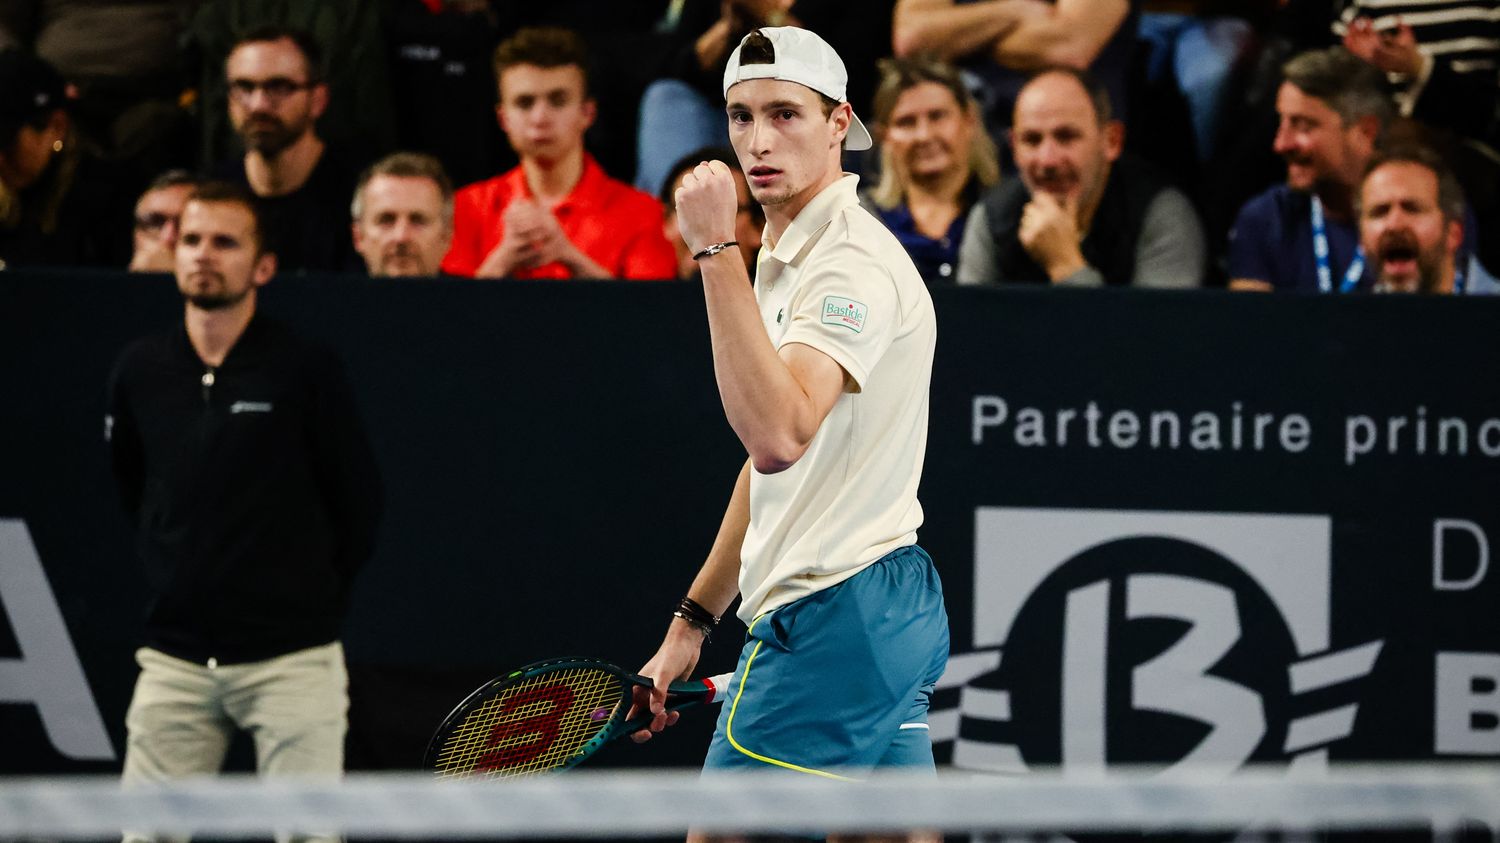 Tennis: Titled in Marseille, Ugo Humbert becomes the first Frenchman to win a tournament this season